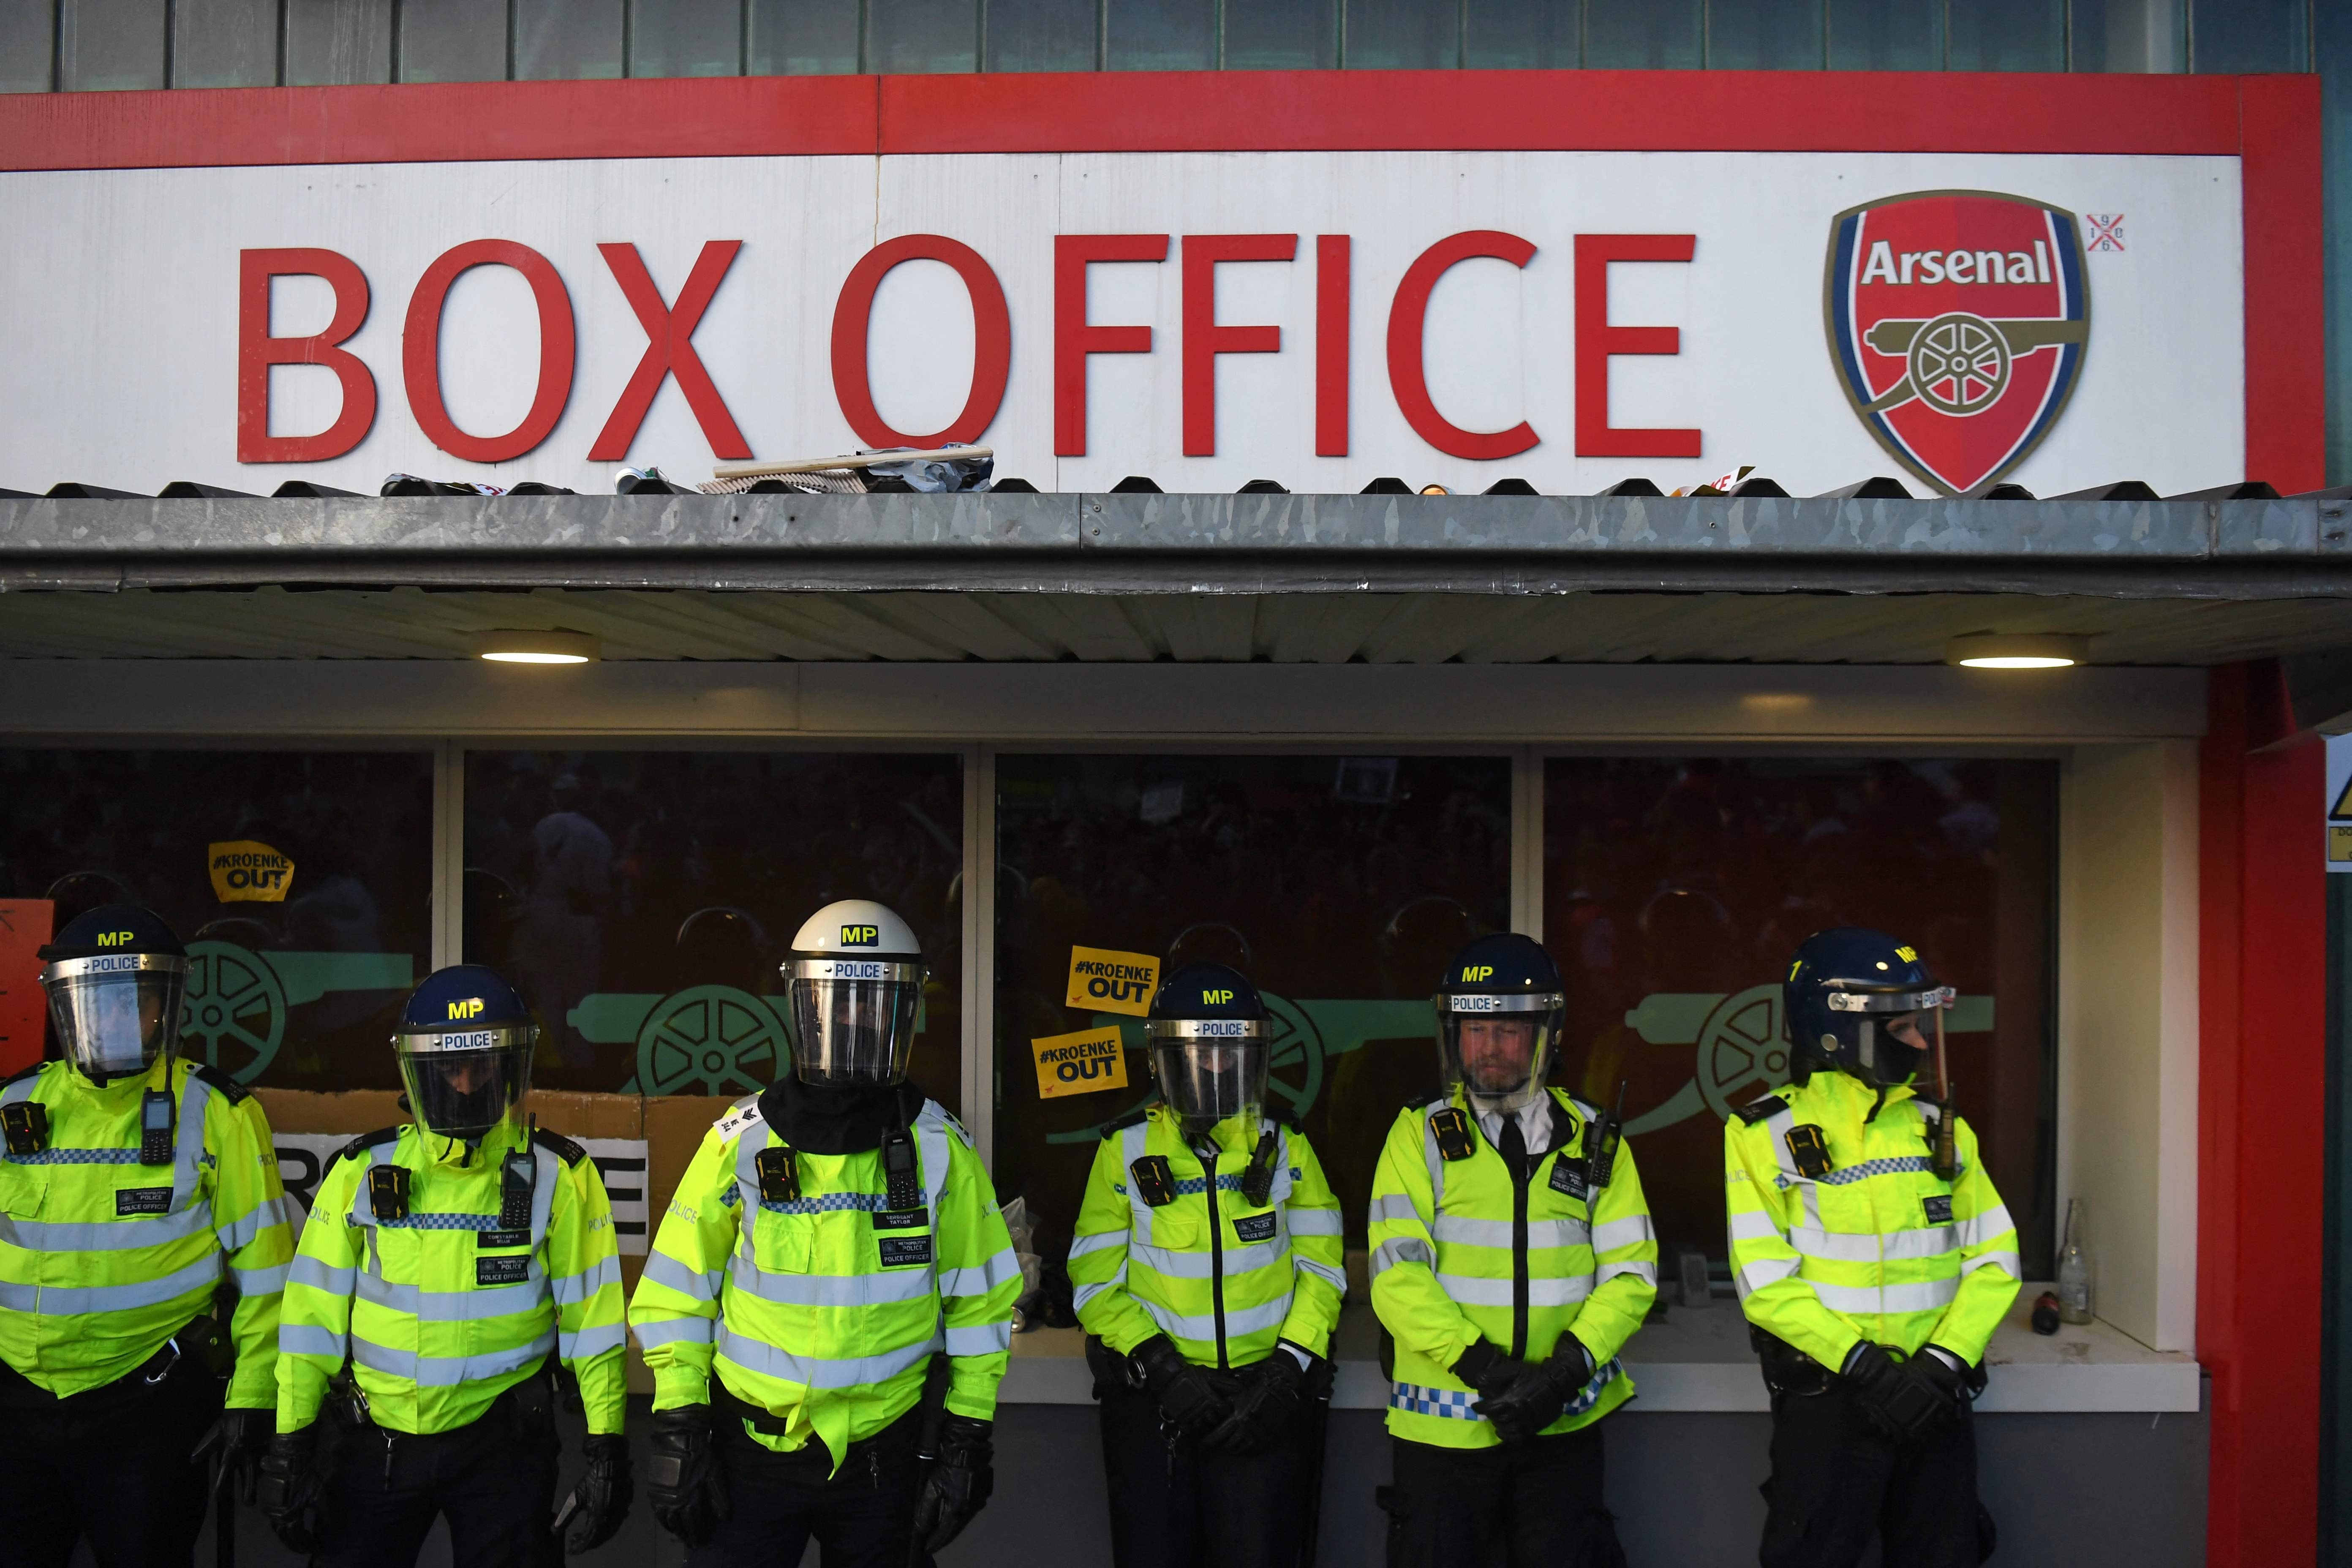 Police officers guard the box office as supporters protest against Arsenal's U.S. owner Stan Kroenke ahead of their game against Everton, outside English Premier League club Arsenal's Emirates stadium in London, Britain, April 23, 2021. (Photo by AFP)